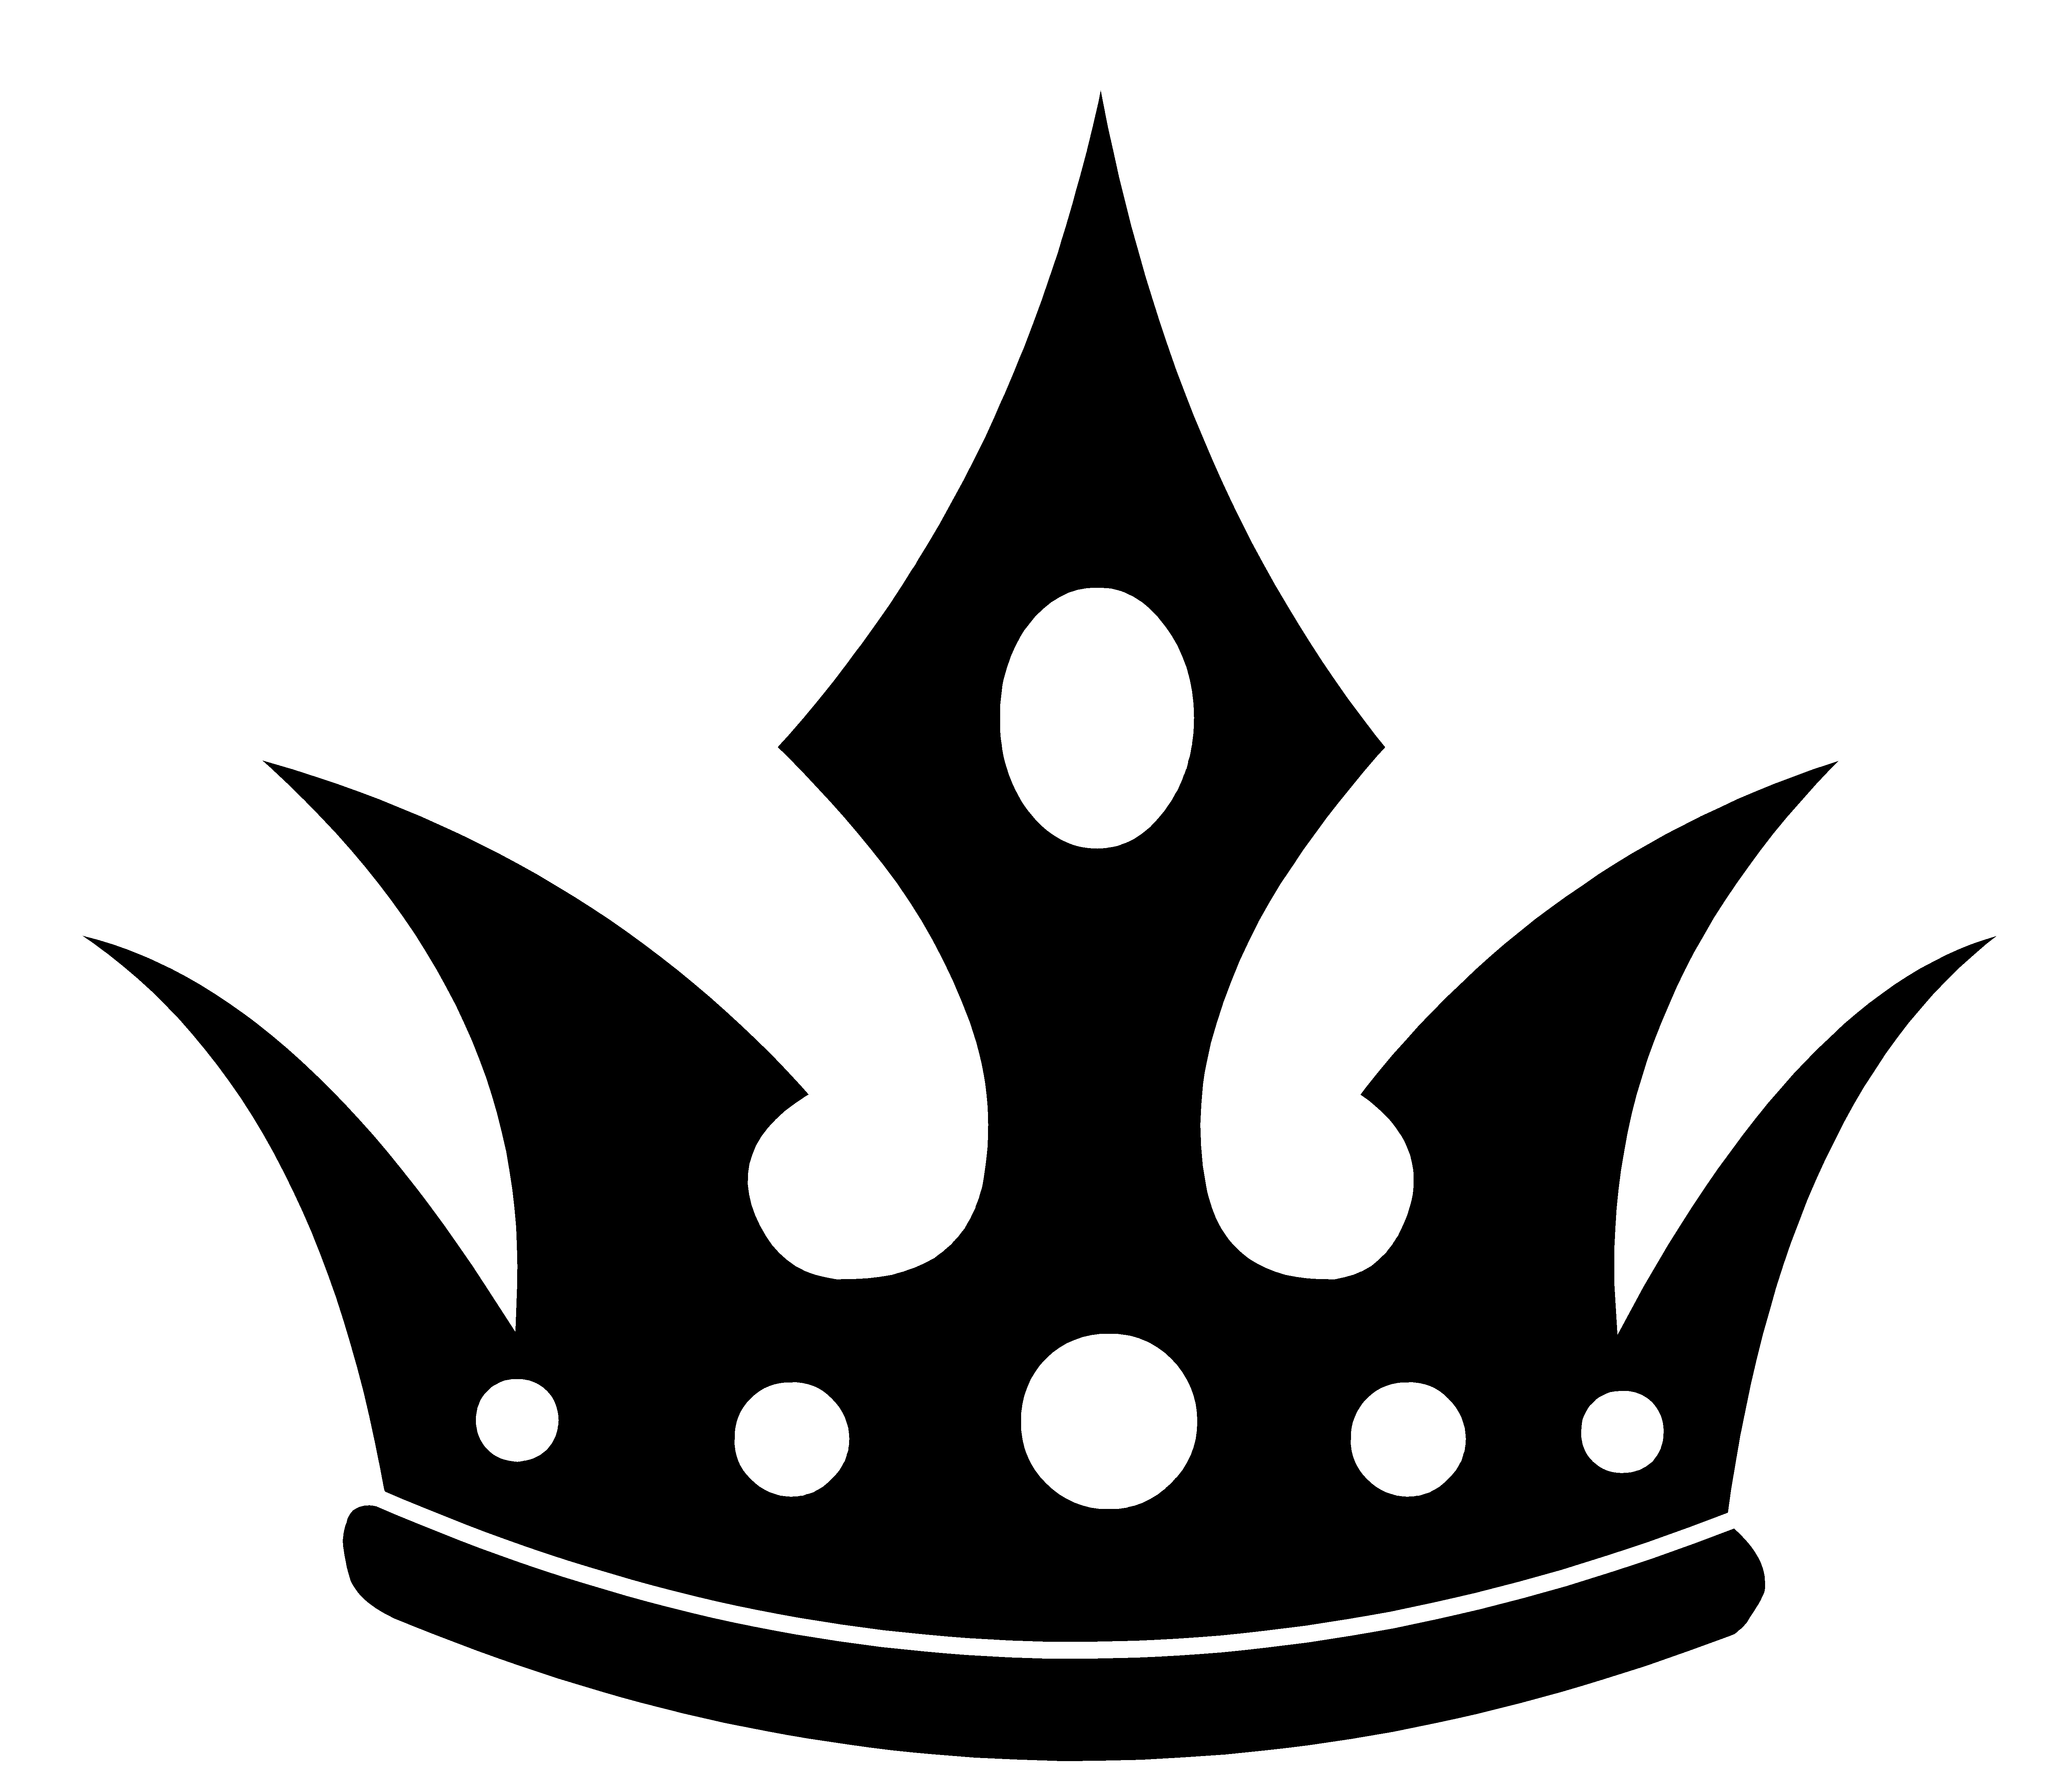 monarchy clipart - Crown Clipart Black And White